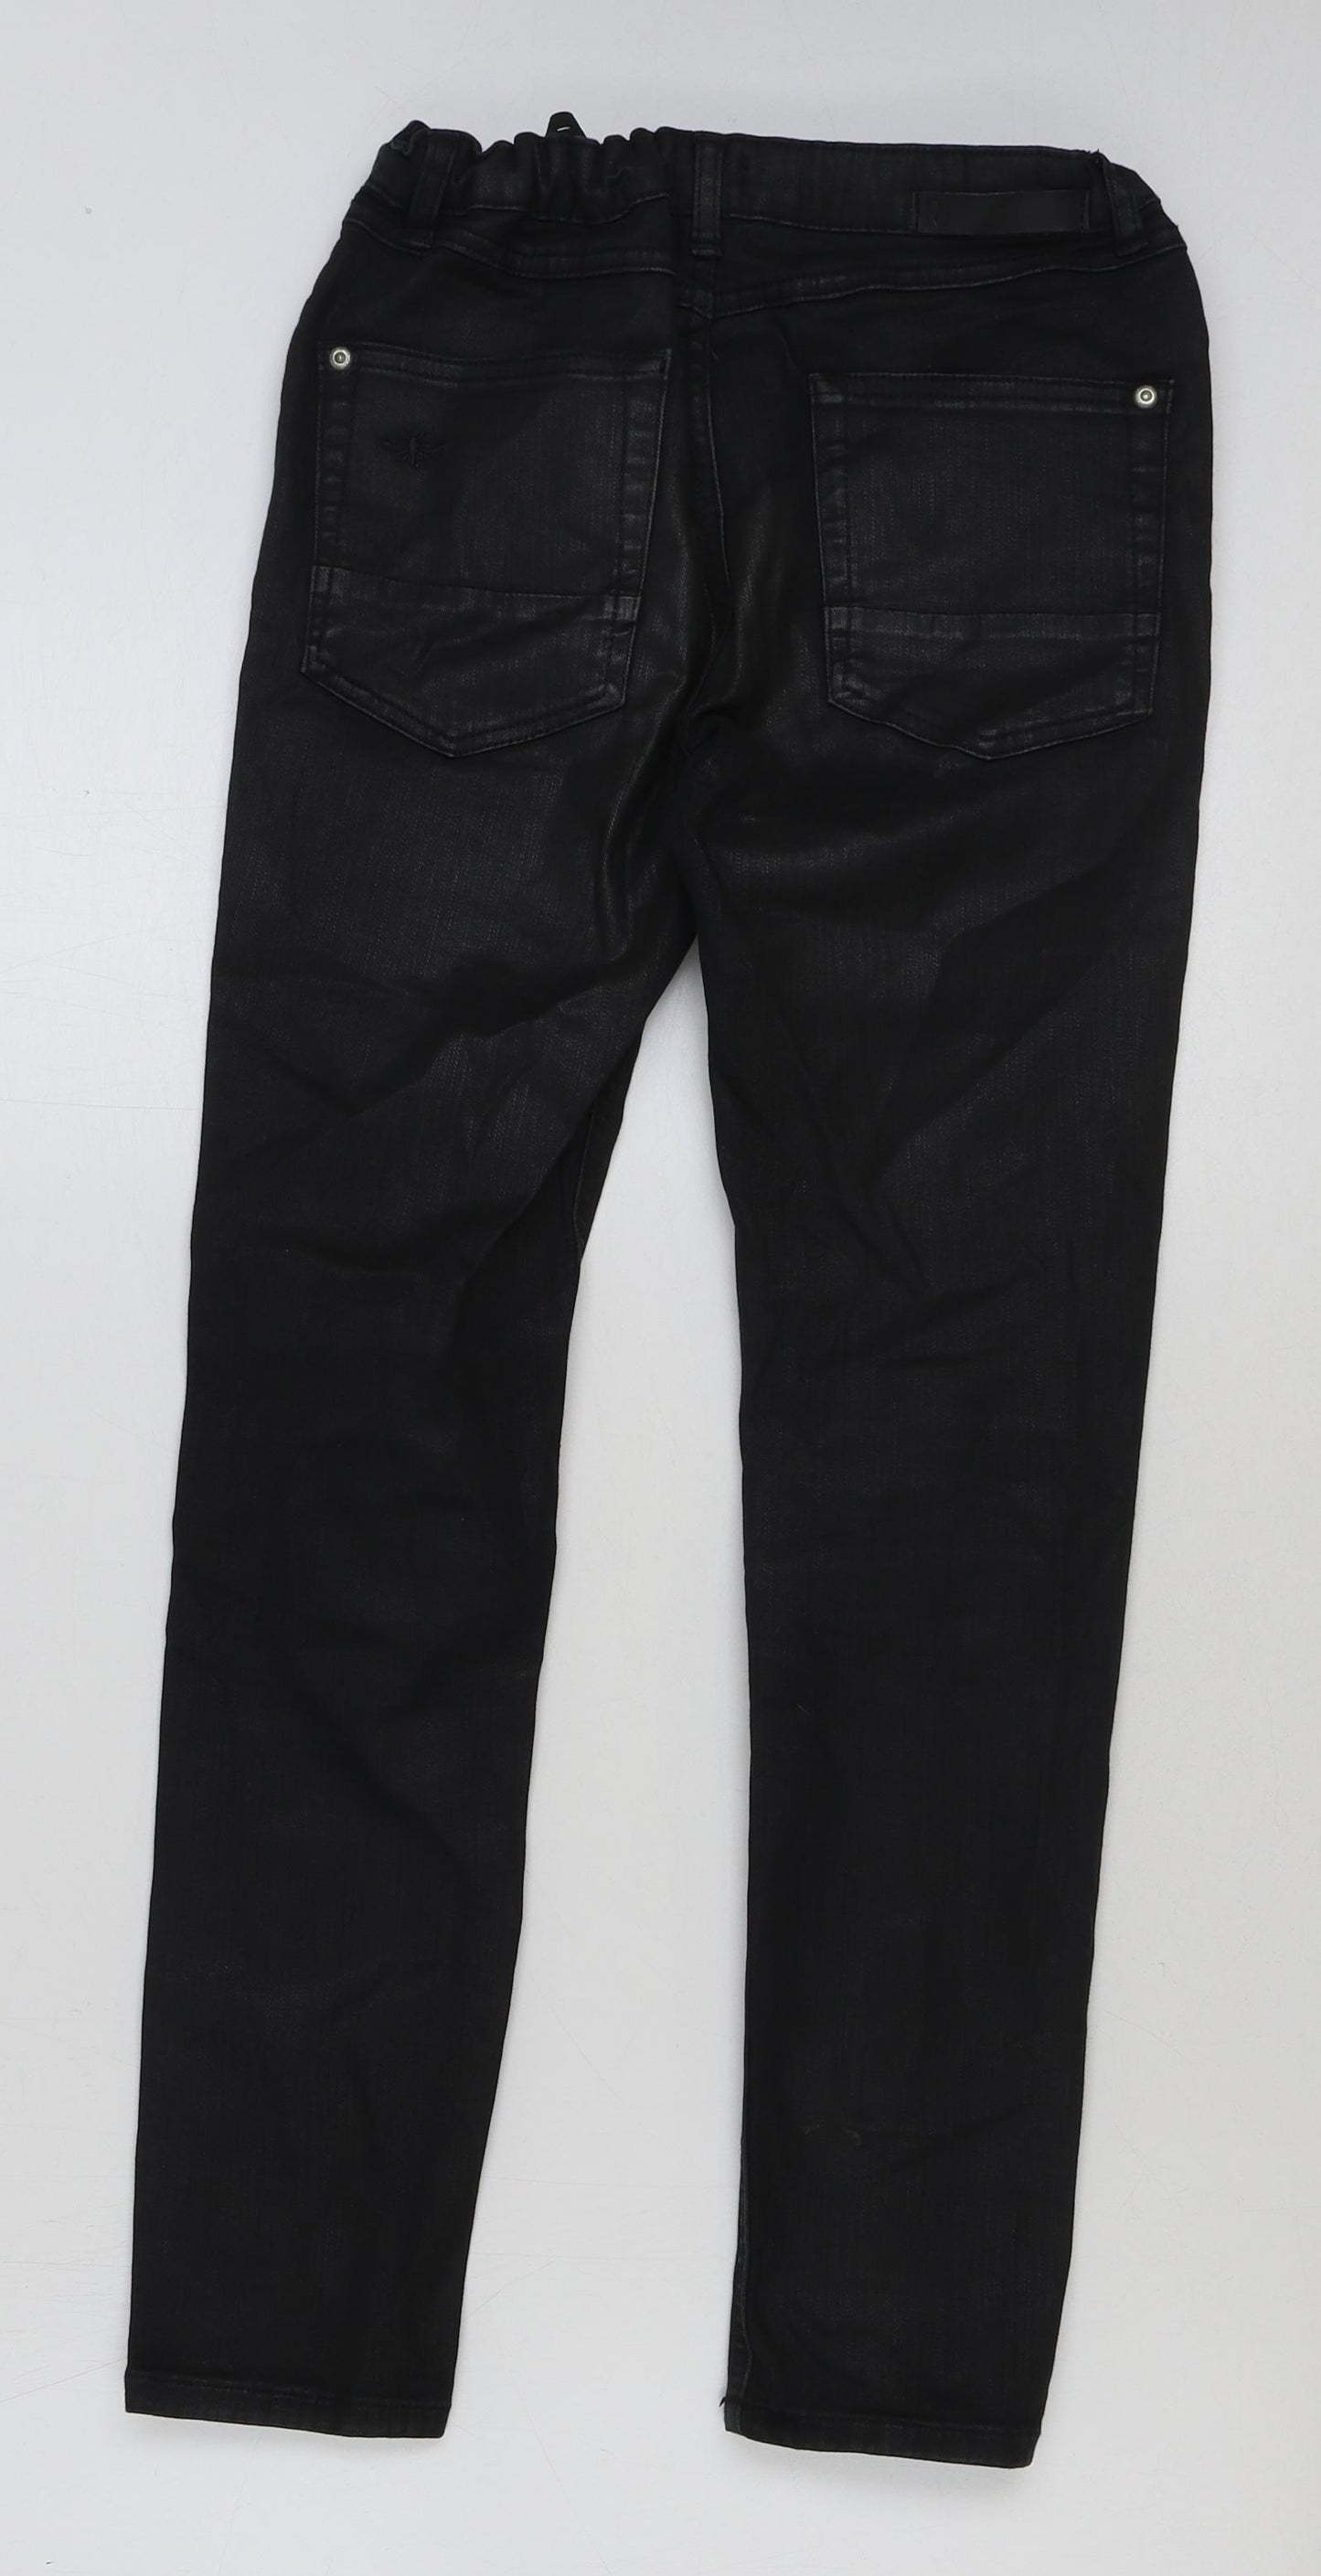 River Island Boys Black Cotton Skinny Jeans Size 12 Years Regular Button